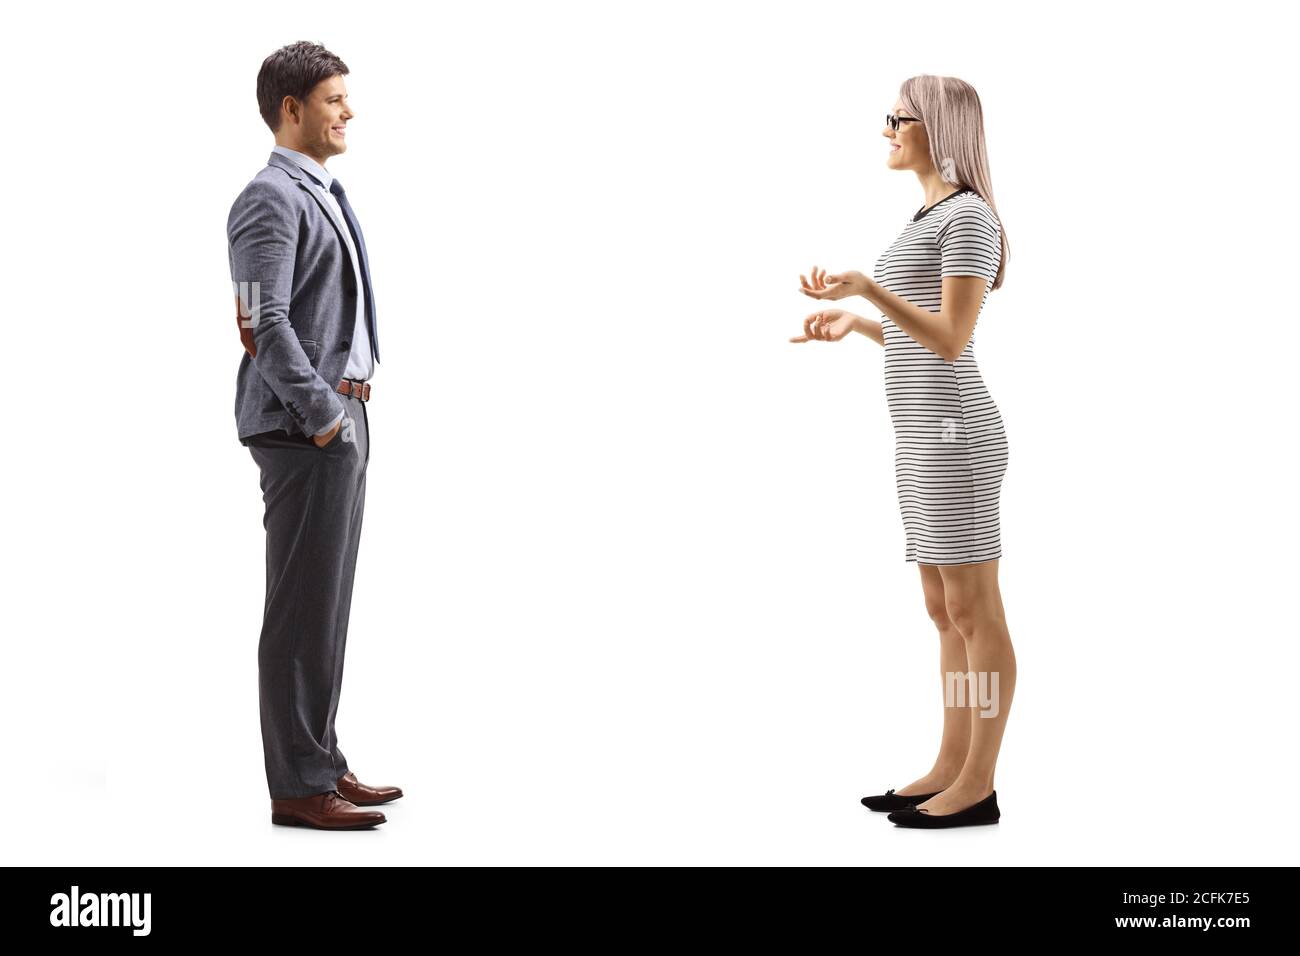 Full length profile shot of a young woman having a conversation with a man isolated on white background Stock Photo